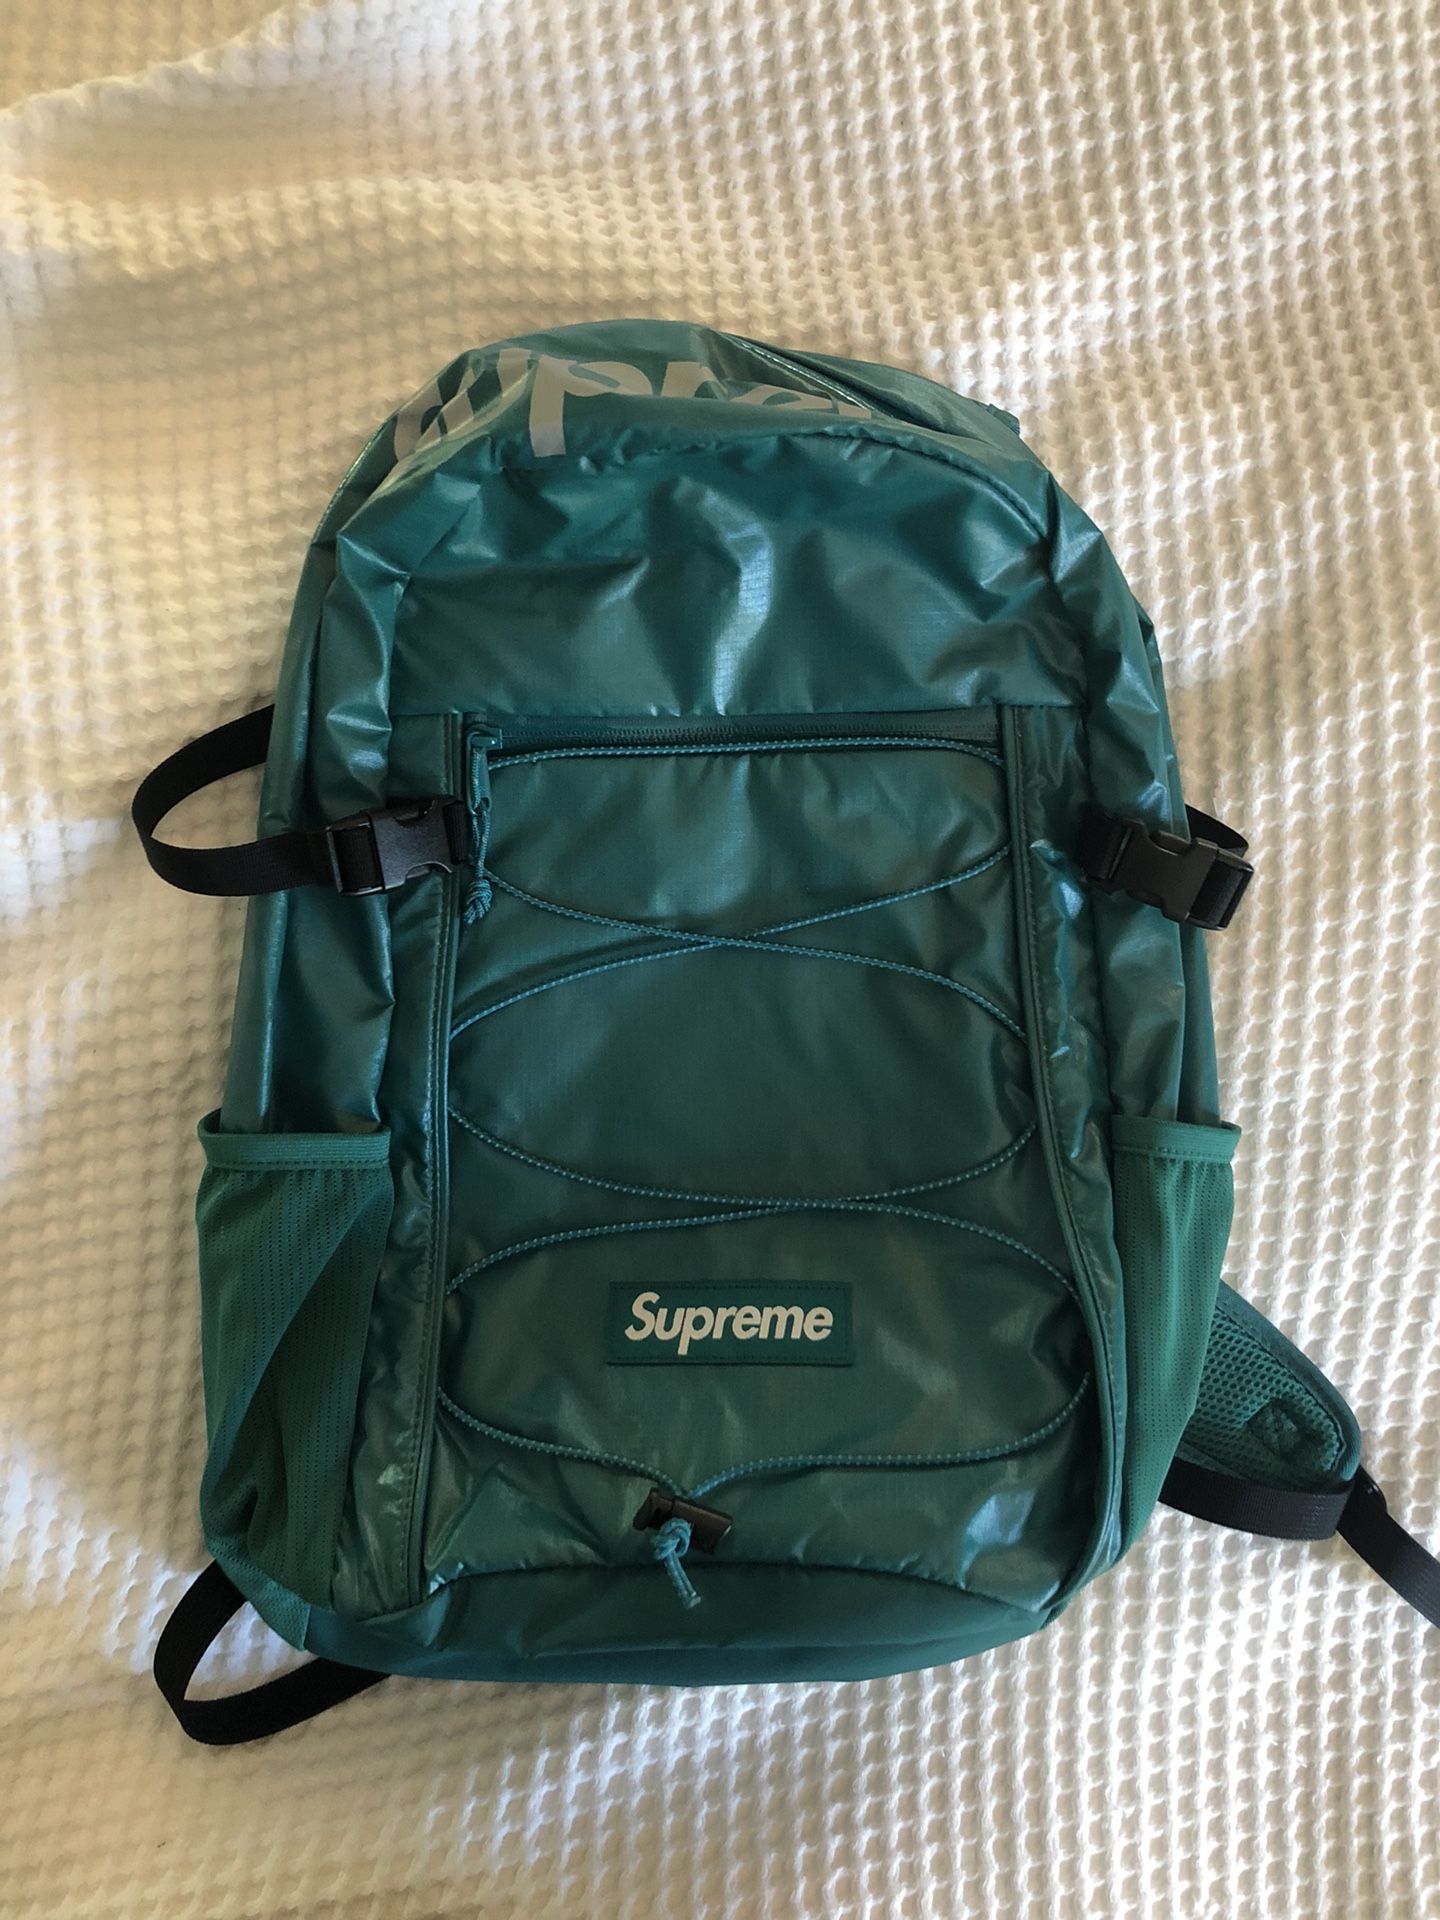 SUPREME Backpack Red Logo Authentic w Receipt for Sale in Park Ridge, IL -  OfferUp